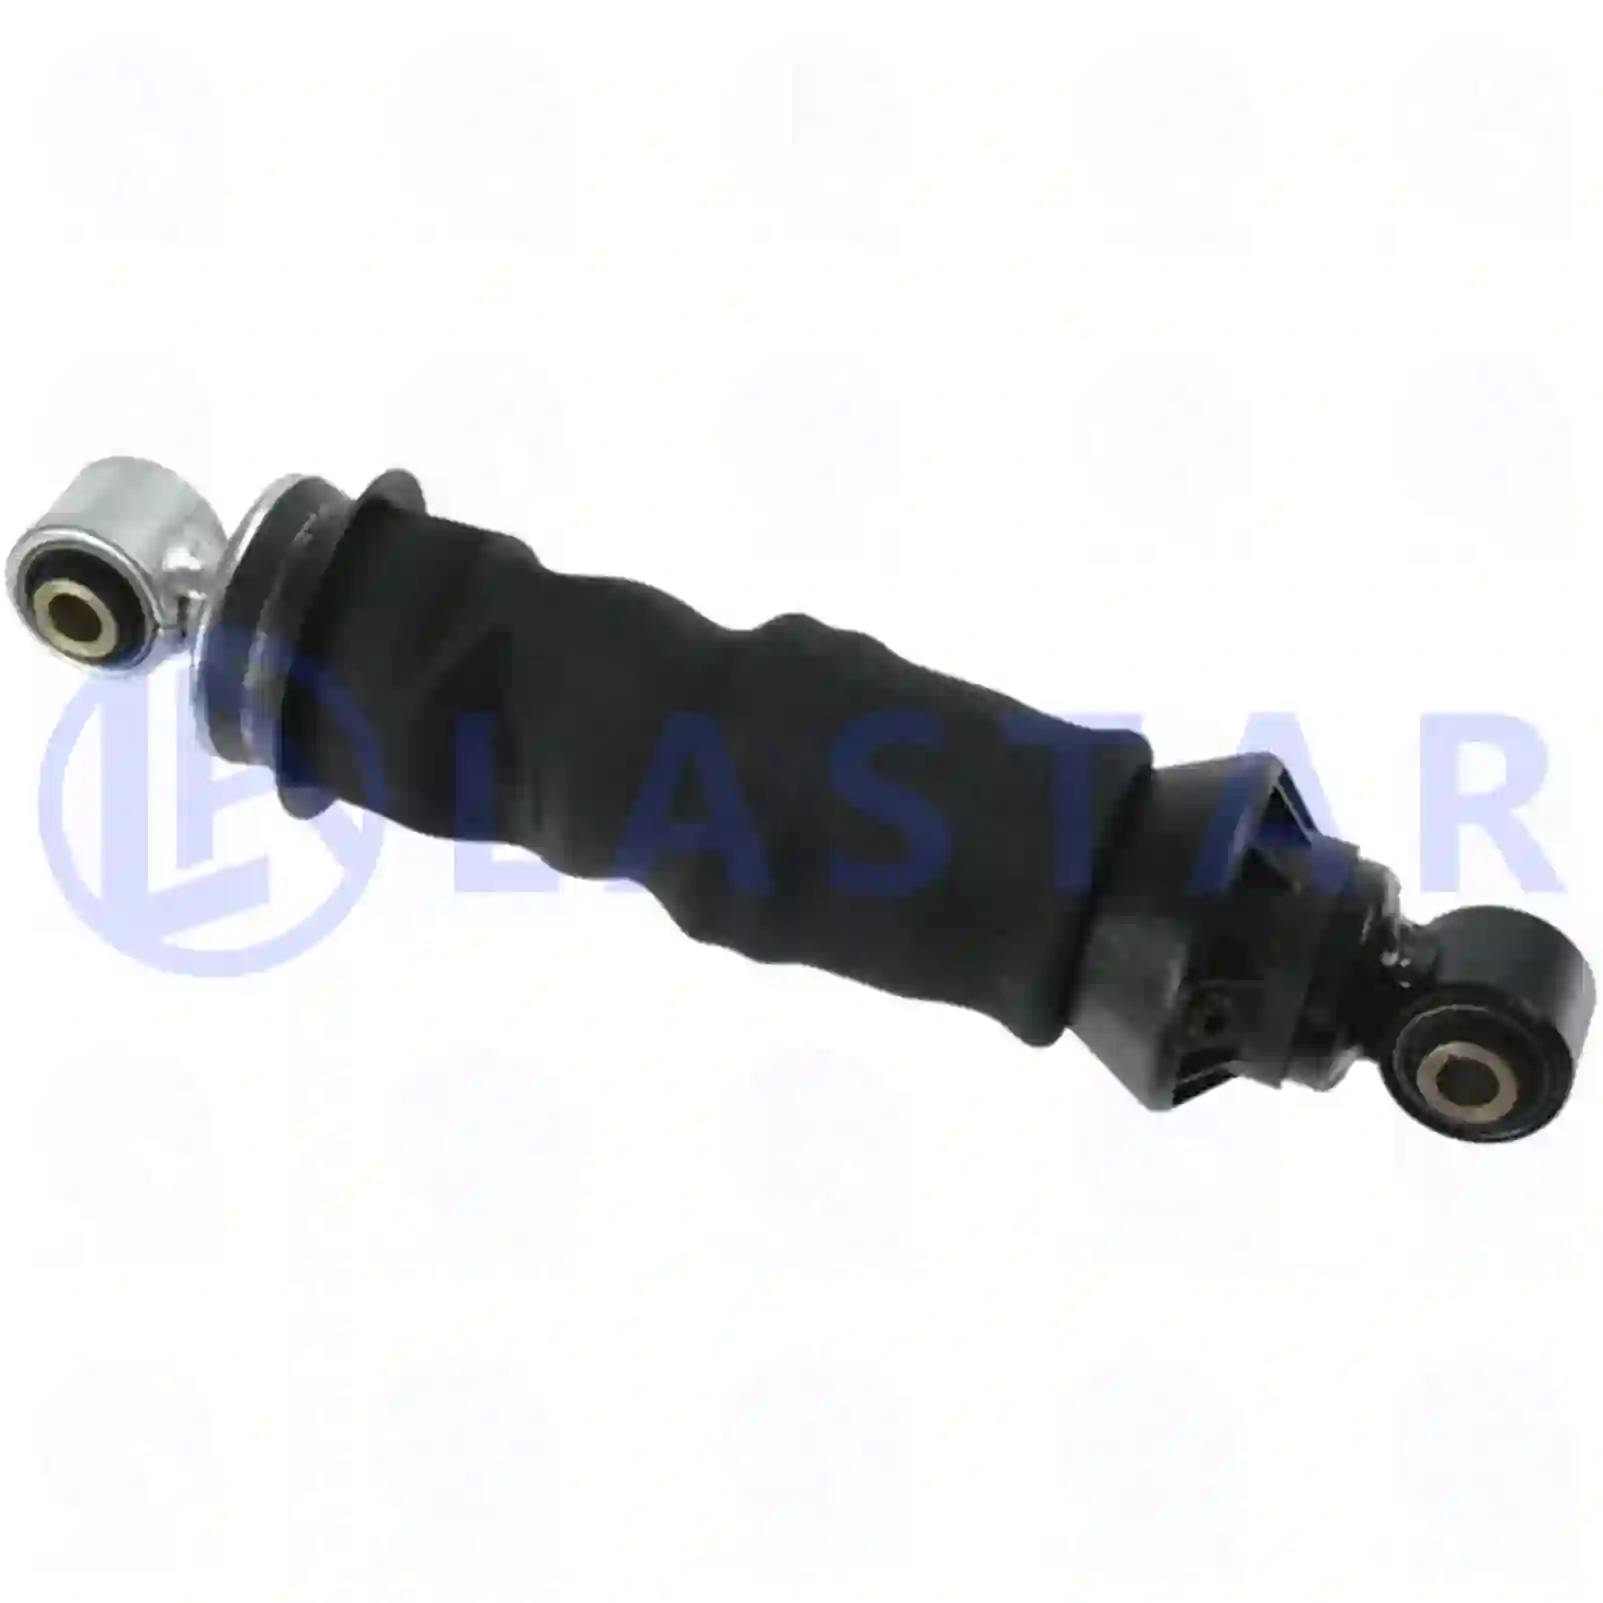 Shock Absorber Cabin shock absorber, with air bellow, la no: 77735188 ,  oem no:5010228908, 5010269674, 5010288908, 5010316783, 5010629398, 20757841, ZG41220-0008 Lastar Spare Part | Truck Spare Parts, Auotomotive Spare Parts